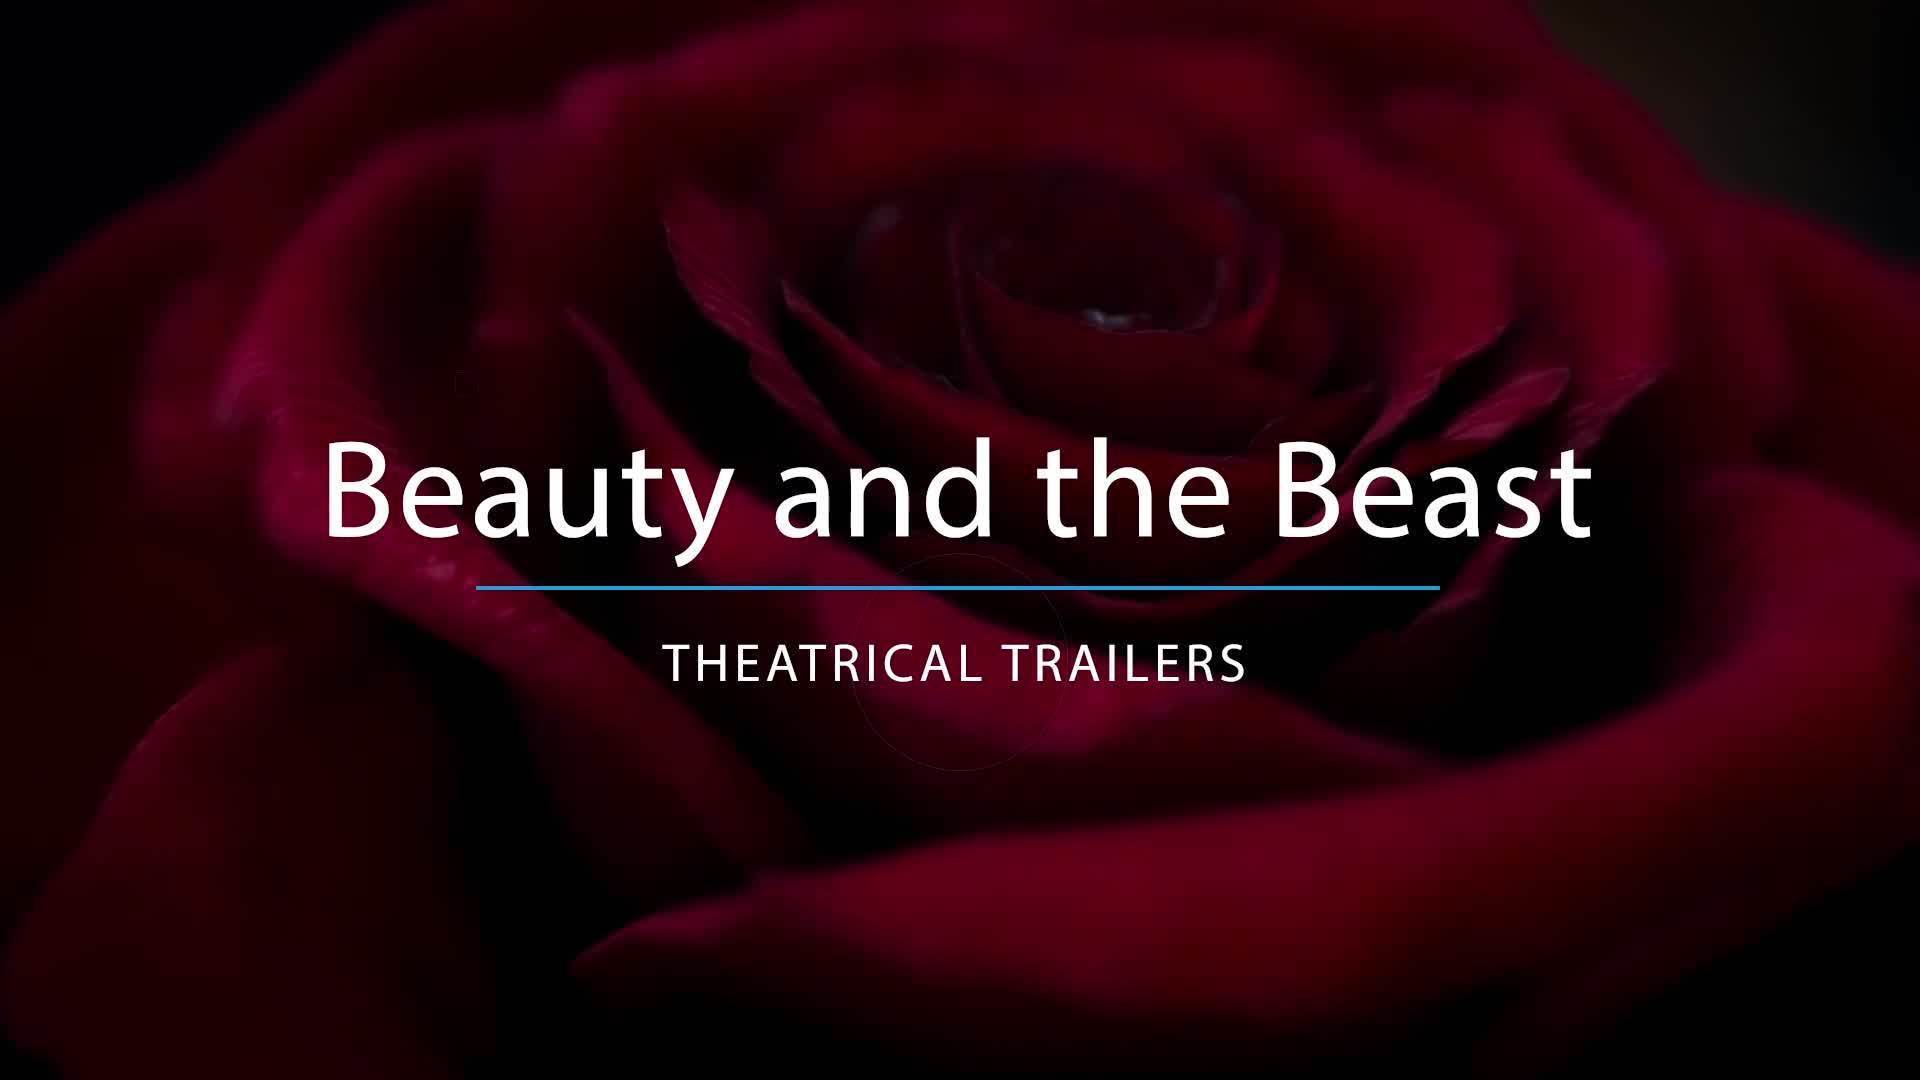 Beauty And The Beast: Theatrical Trailers